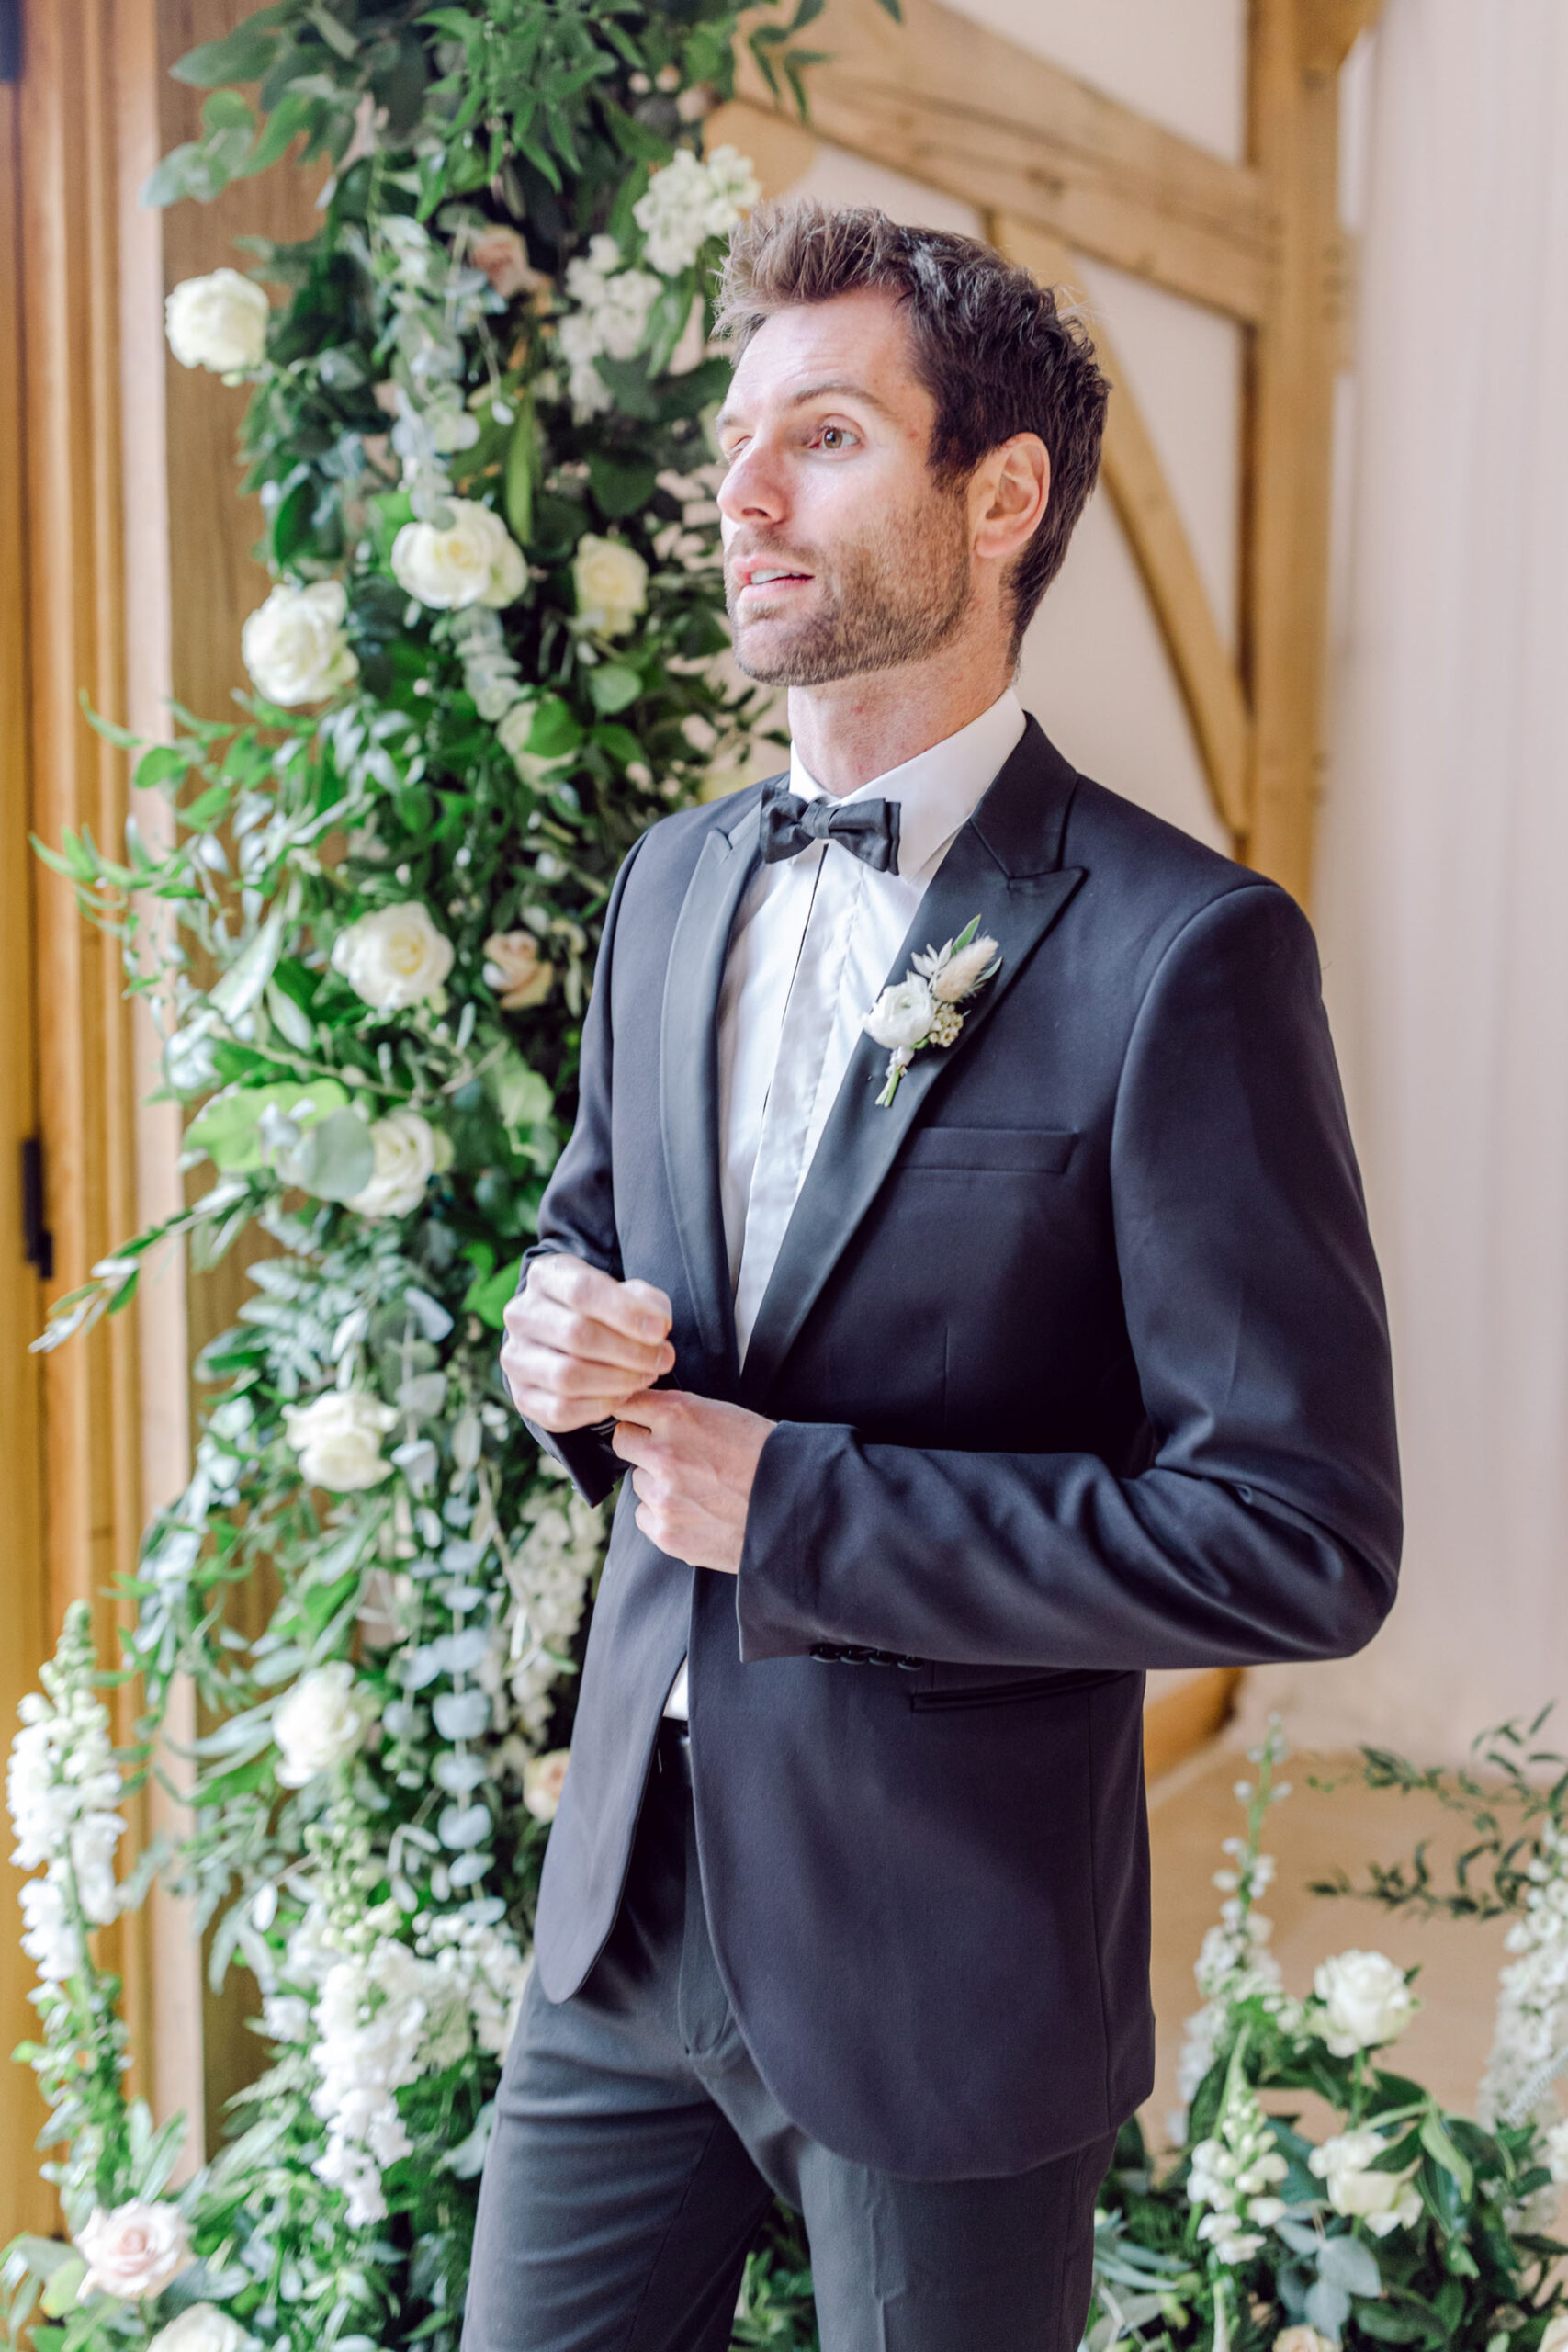 Luxe editorial with blush and white florals.  Image credit Natalie D Photography